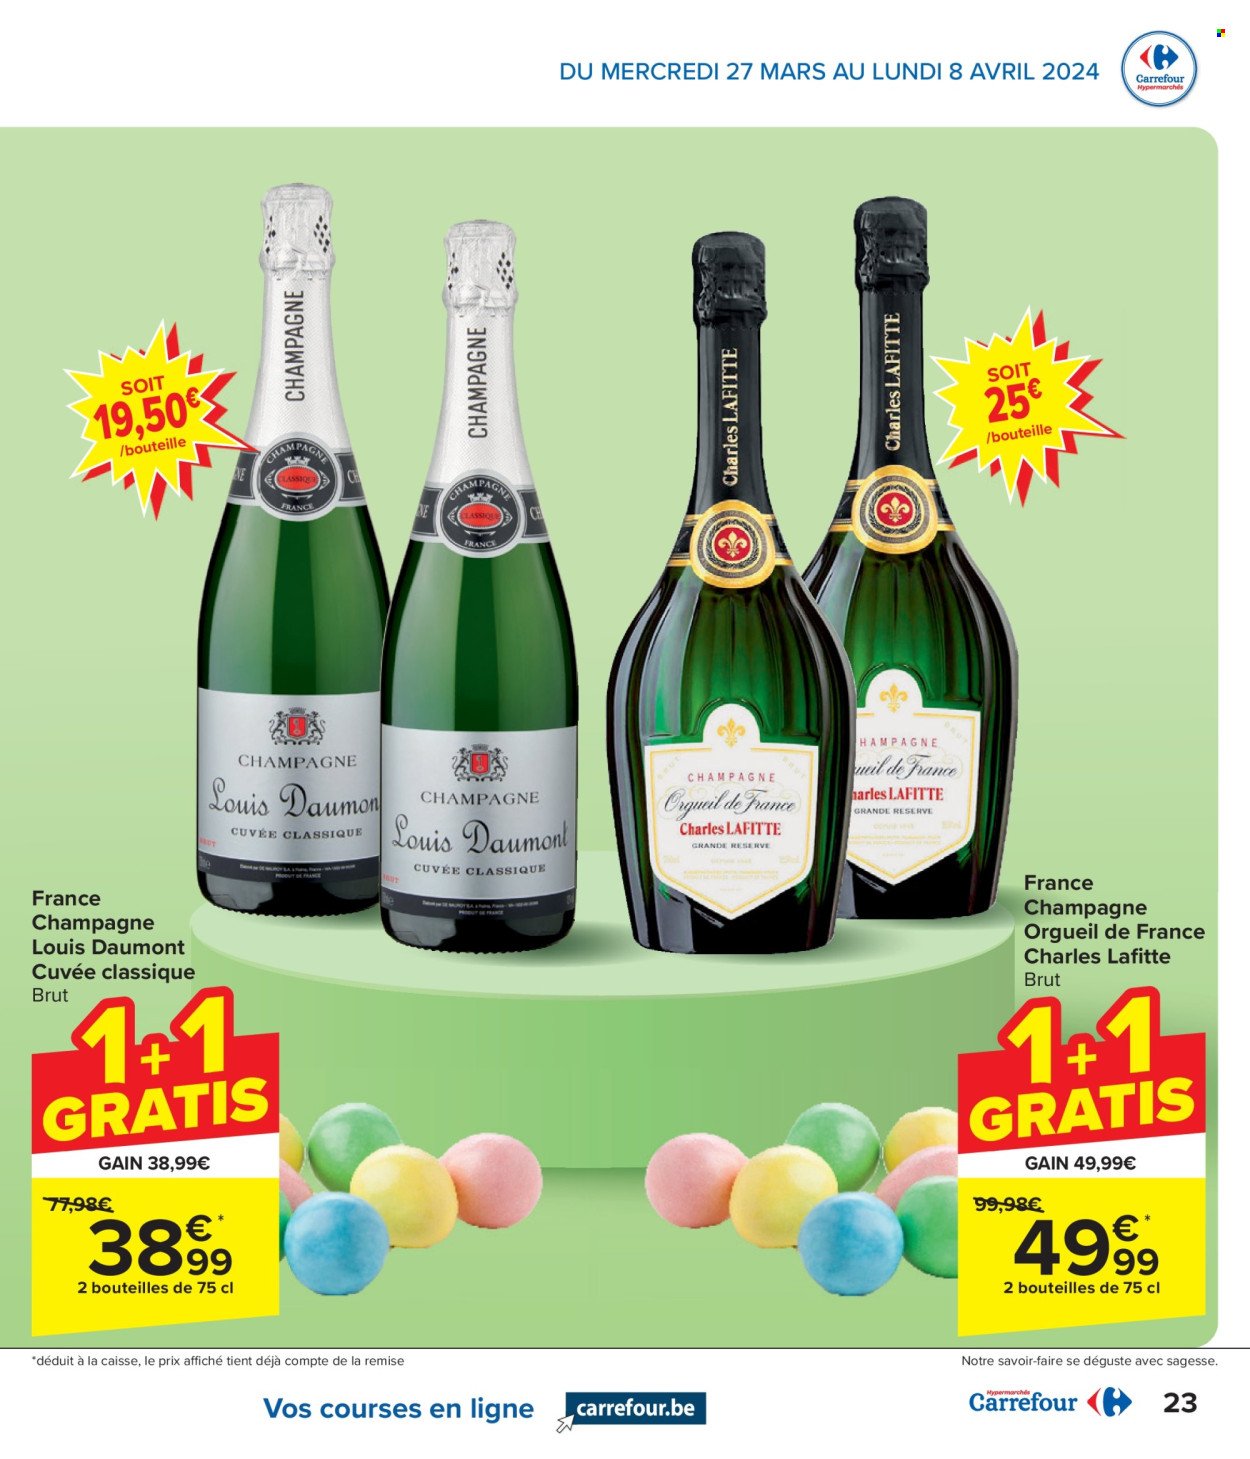 Catalogue Carrefour hypermarkt - 27.3.2024 - 8.4.2024. Page 23.